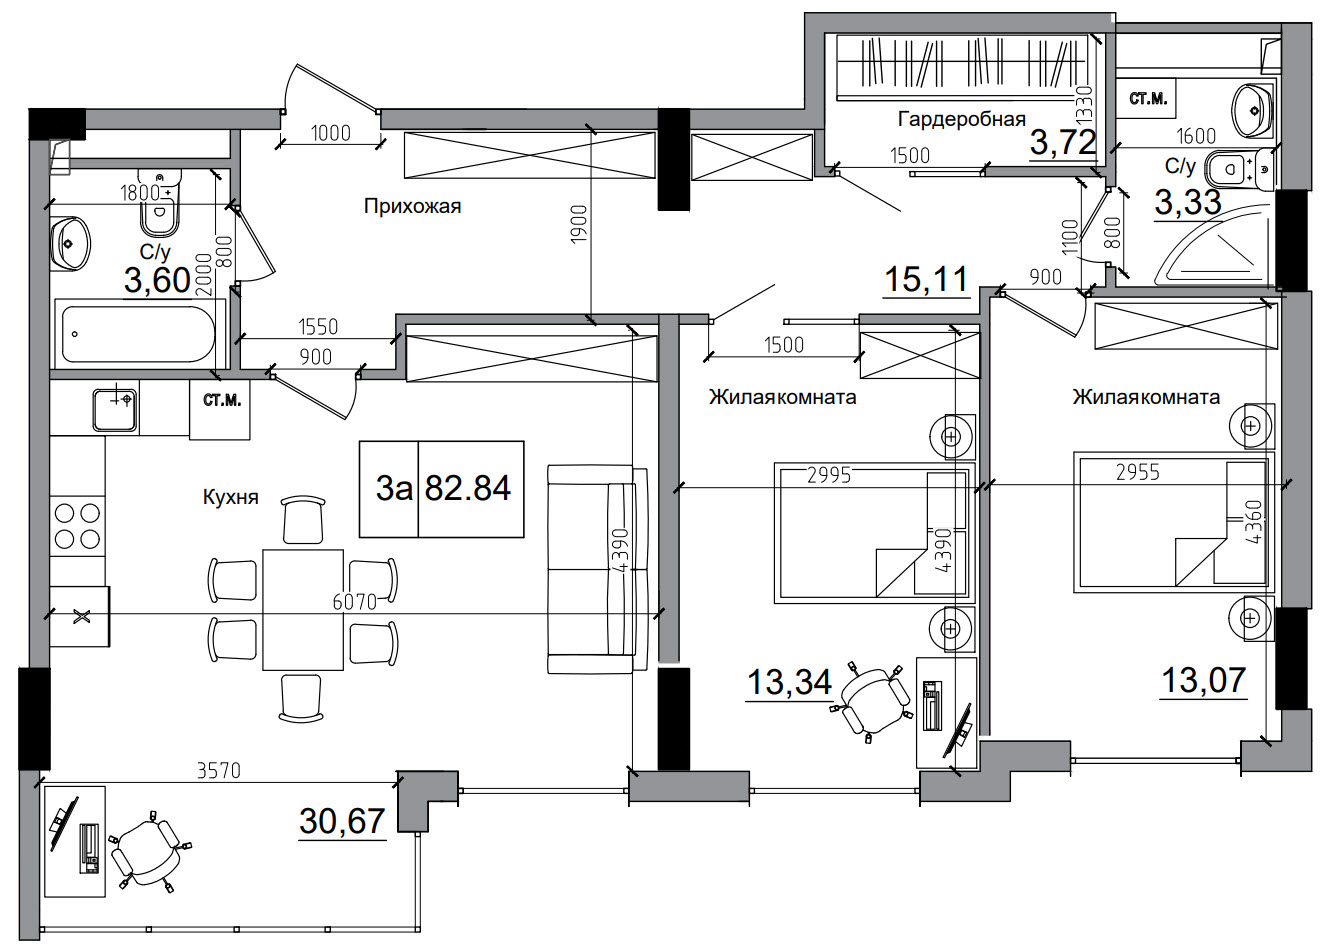 Planning 2-rm flats area 82.84m2, AB-11-12/00012.